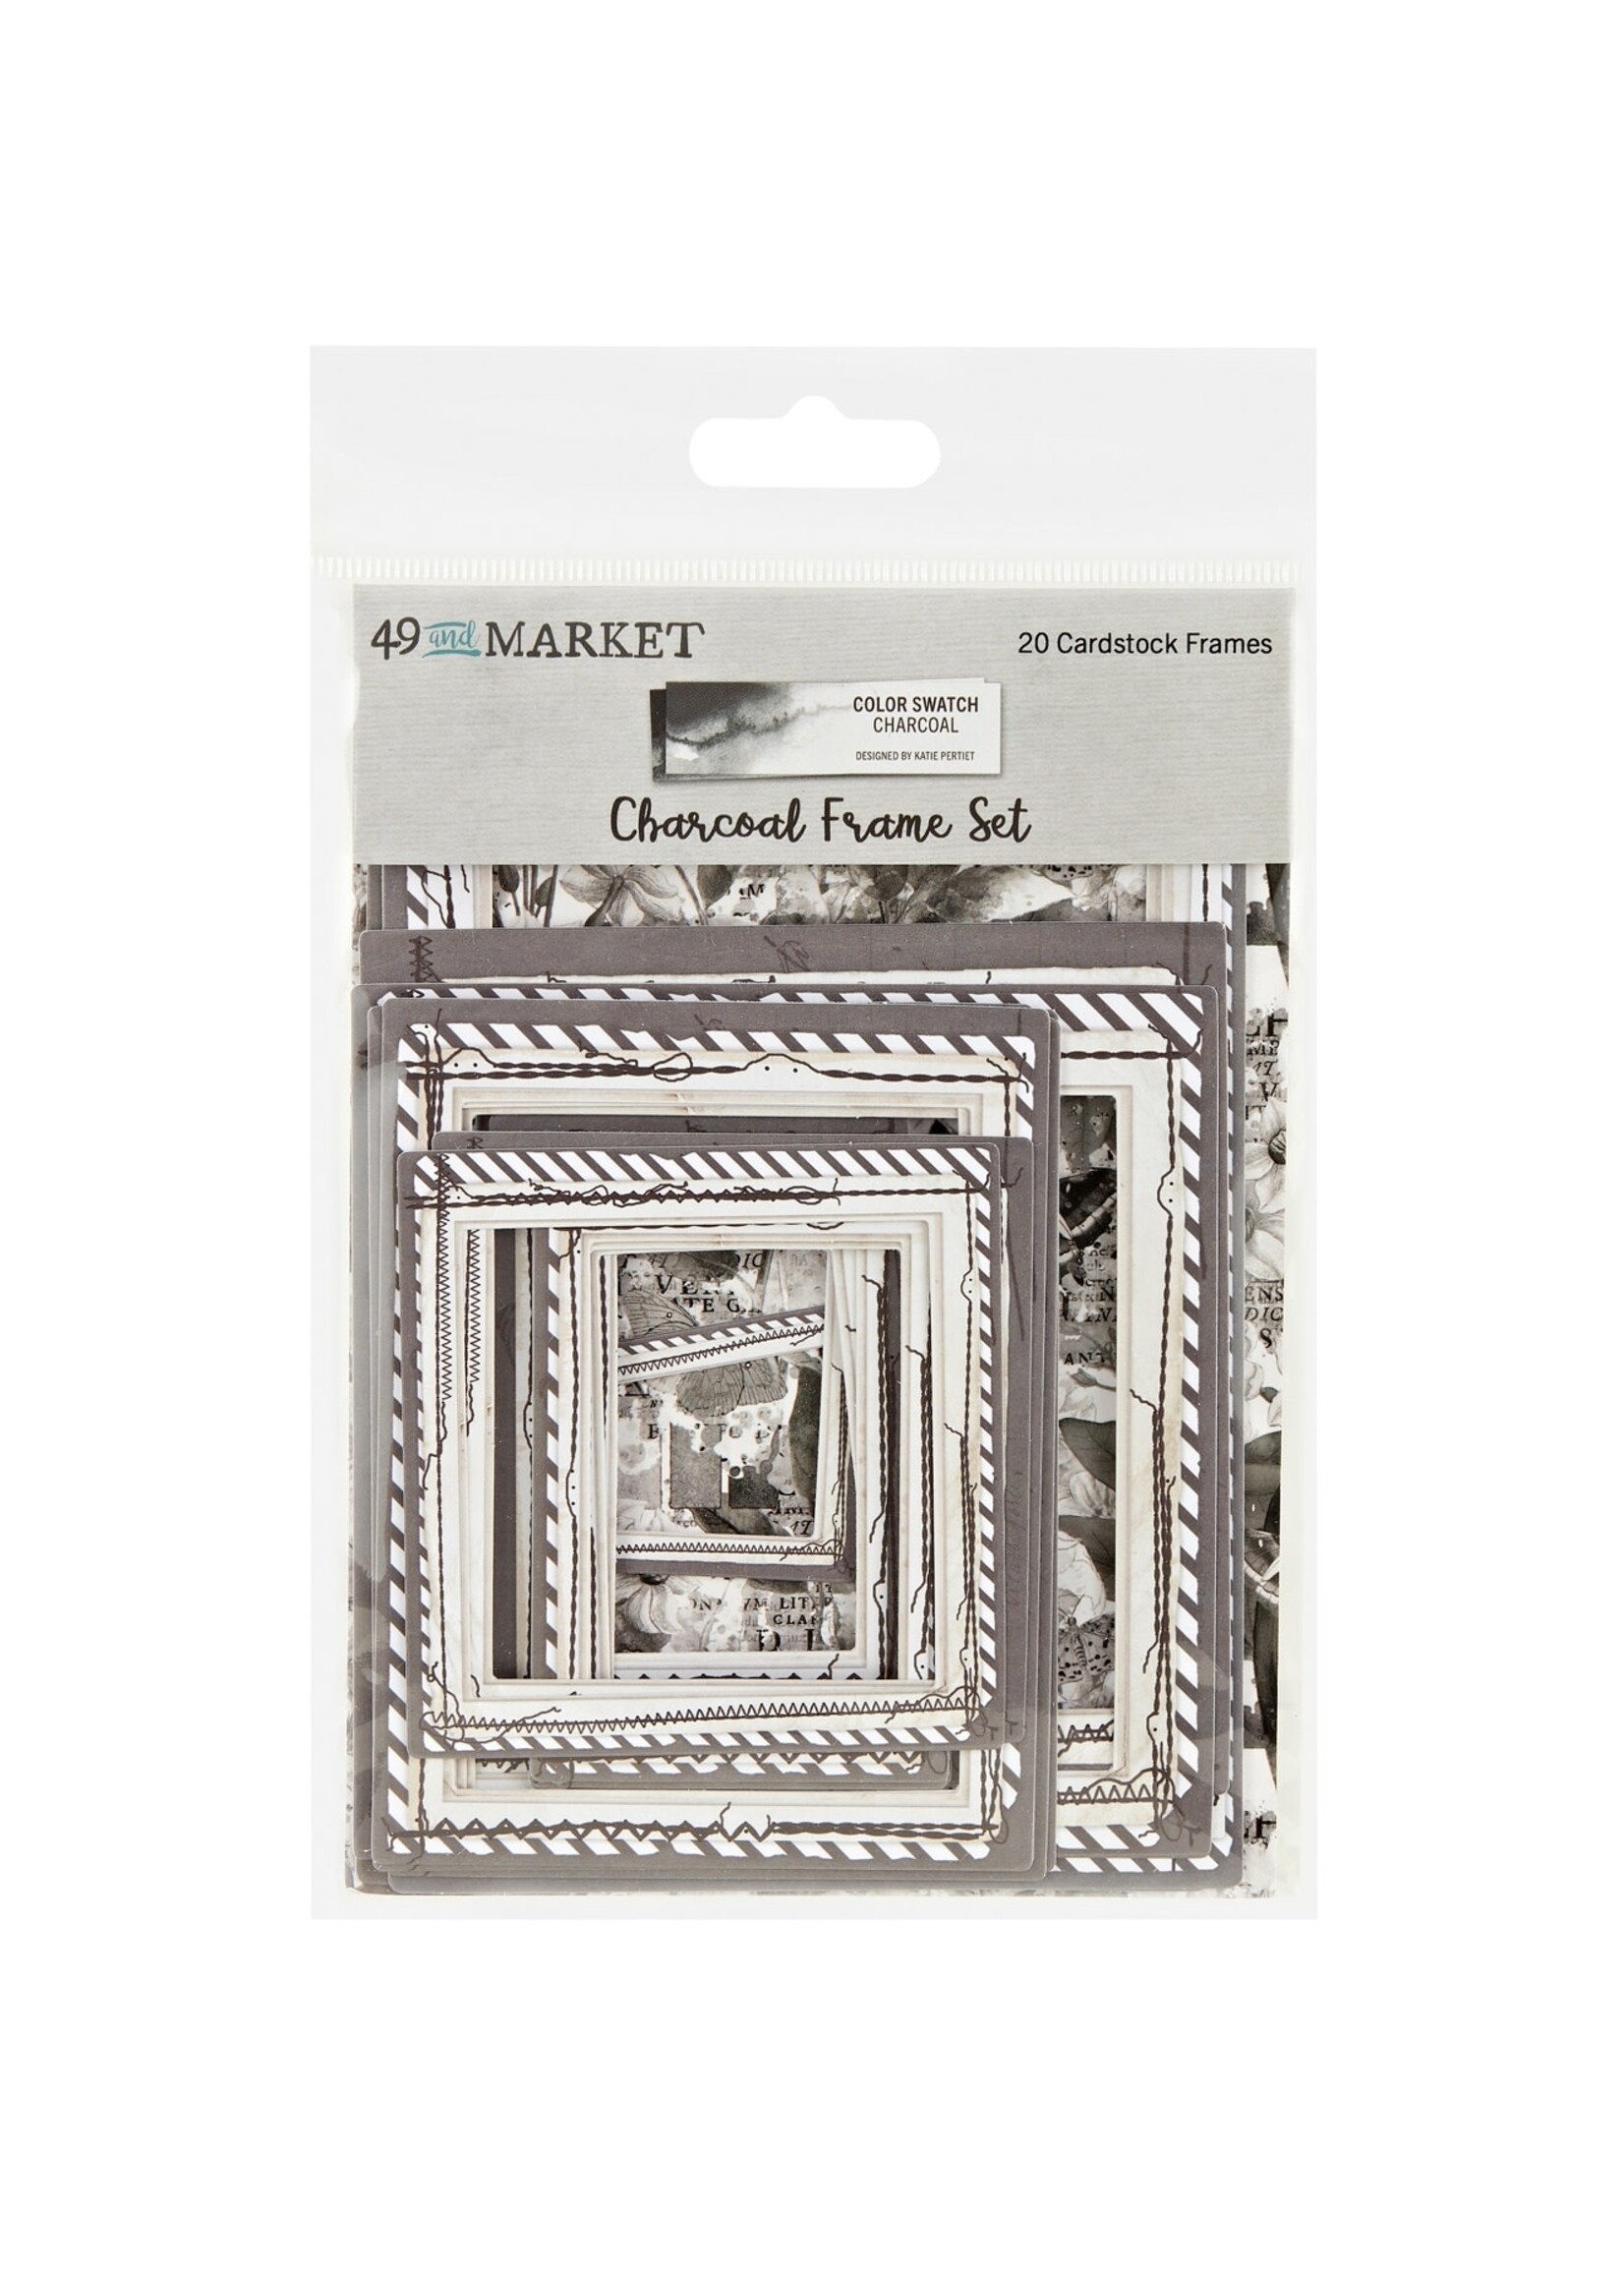 49 and Market Color Swatch: Charcoal Frame Set